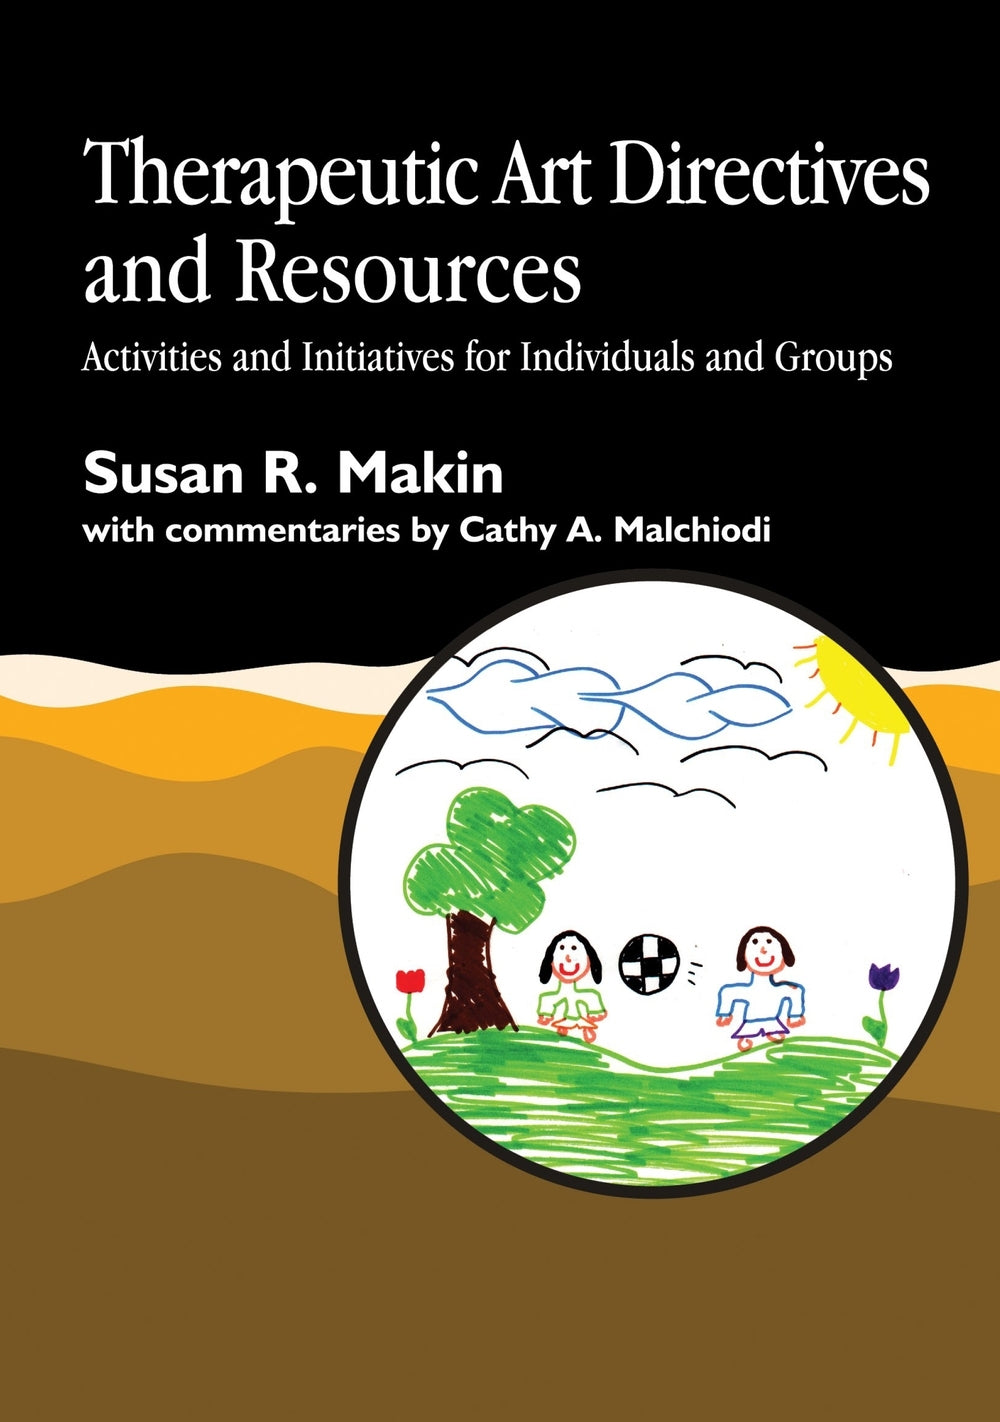 Therapeutic Art Directives and Resources by Susan R. Makin, Ms Cathy A Malchiodi